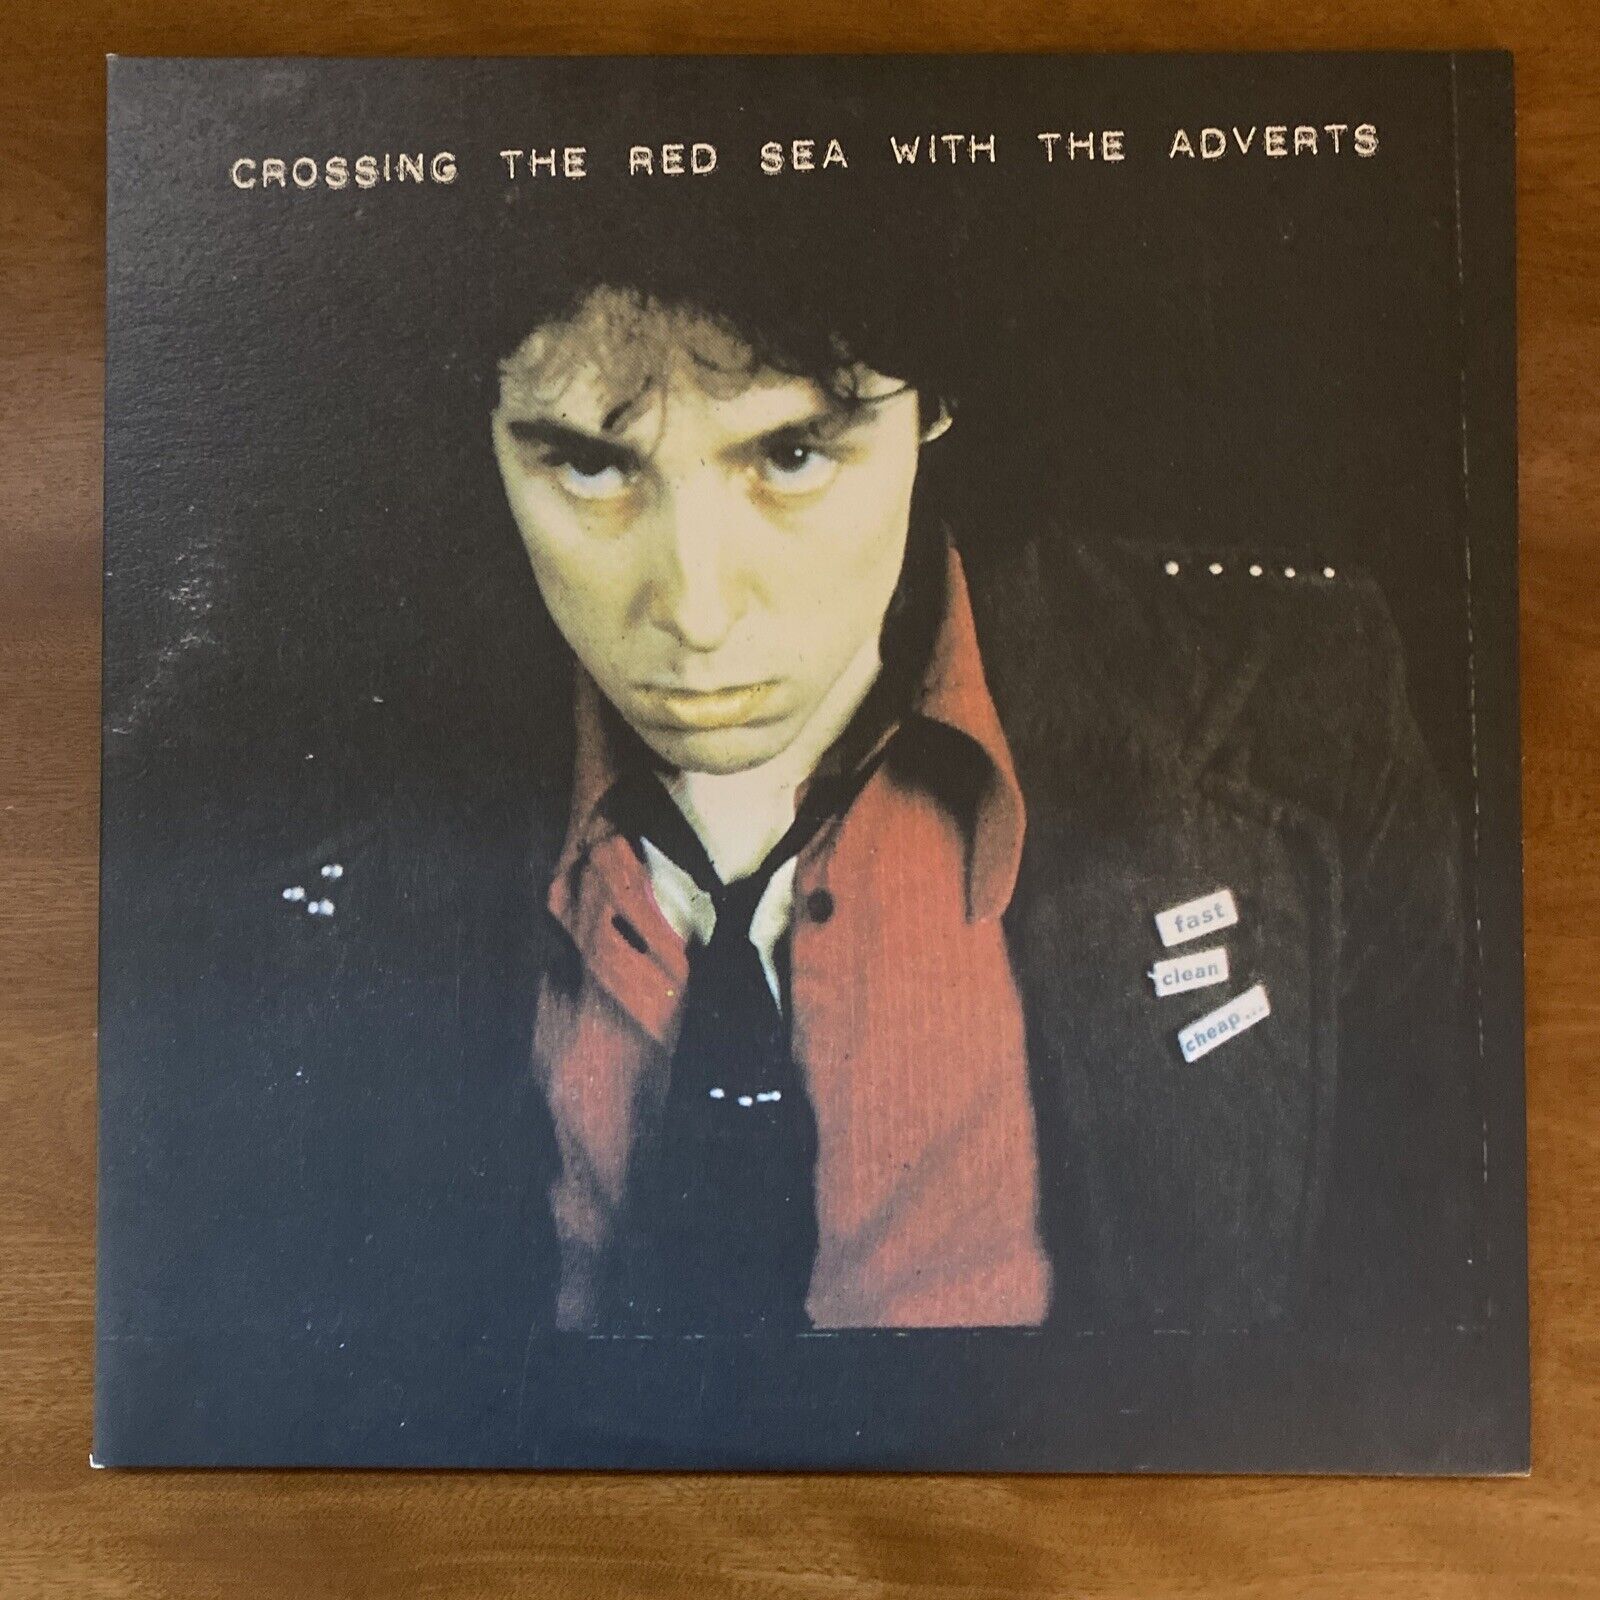 Crossing the Red Sea with the Adverts by The Adverts Double LP 2011 Reissue NM